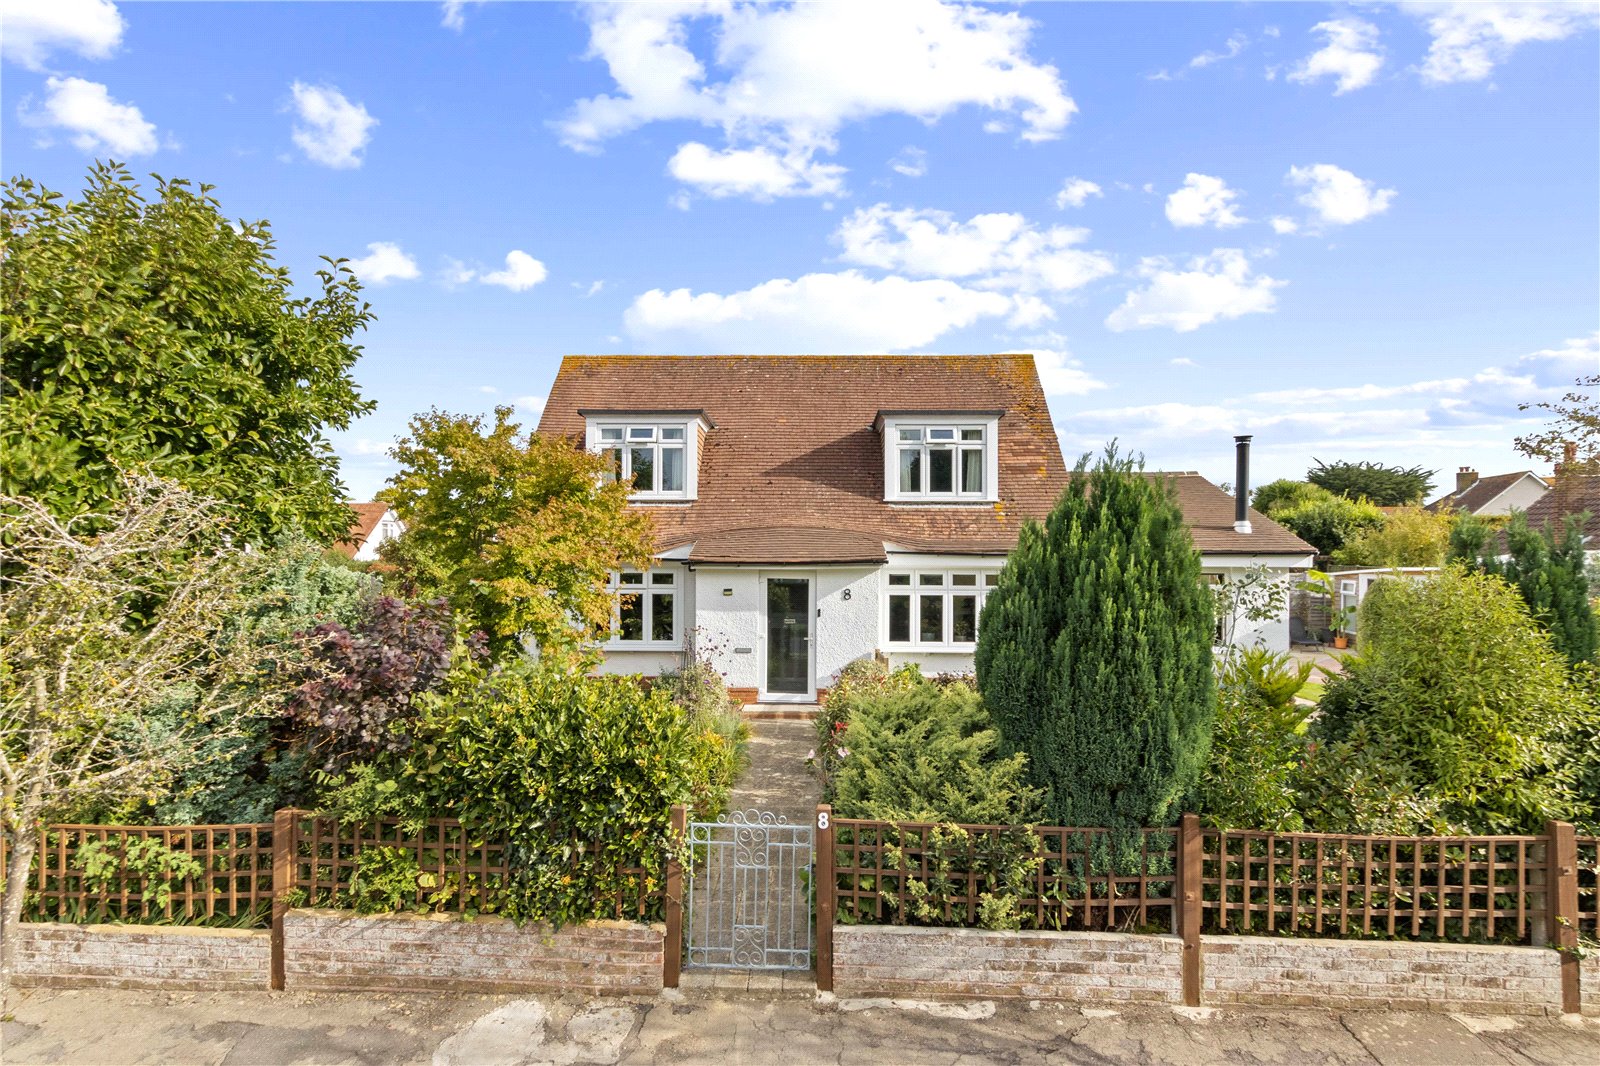 4 bed house for sale in Fernhurst Gardens, Aldwick - Property Image 1